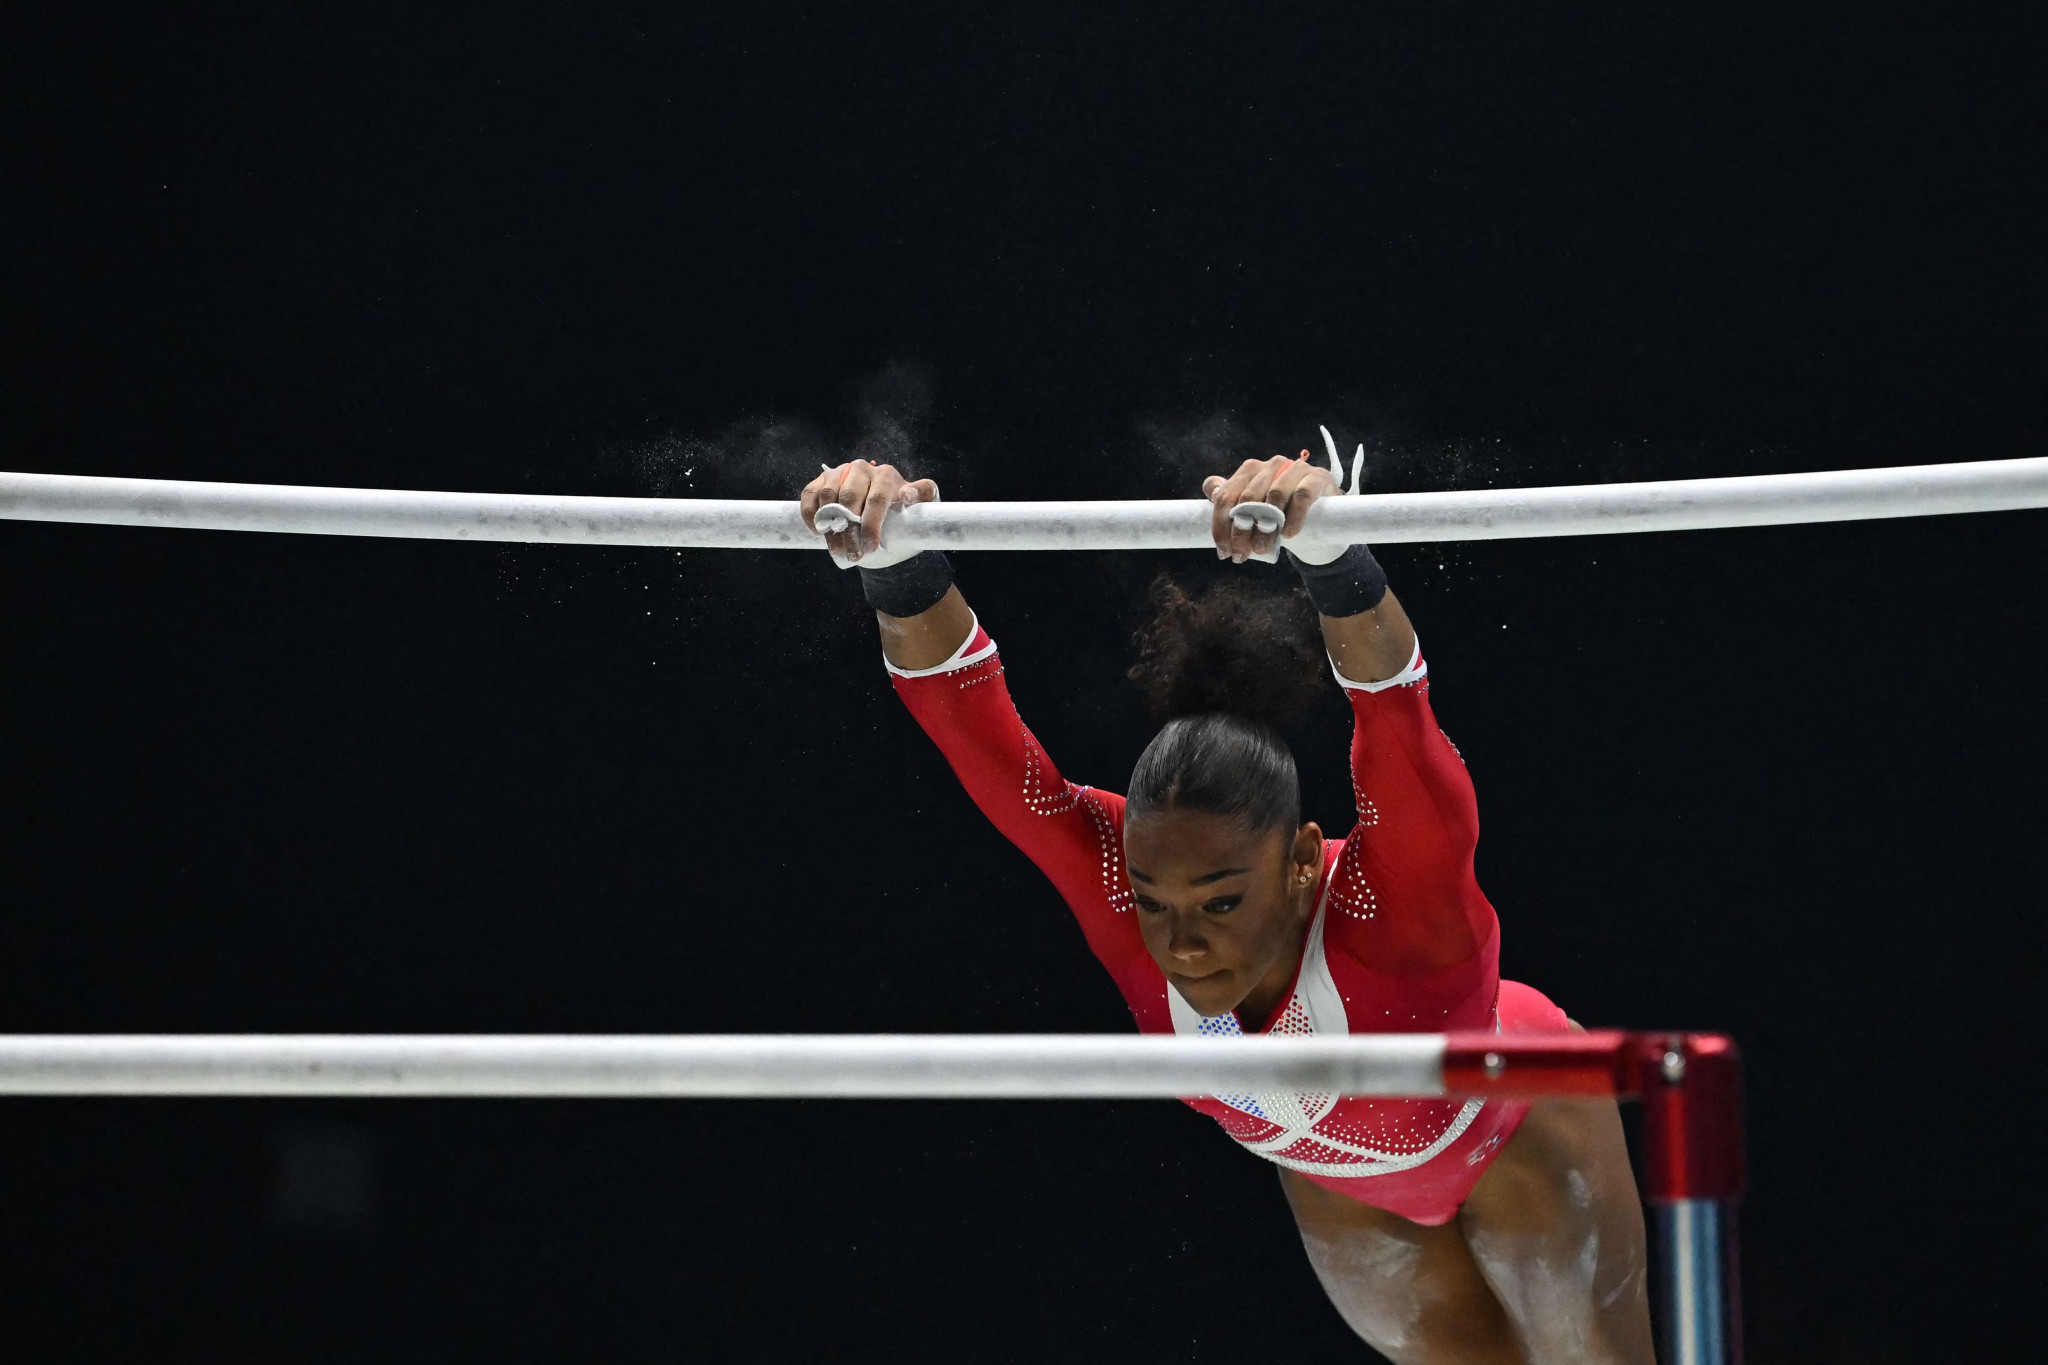 Mélanie de Jesus dos Santos won two gold medals at the Bercy Arena in Paris ©Getty Images